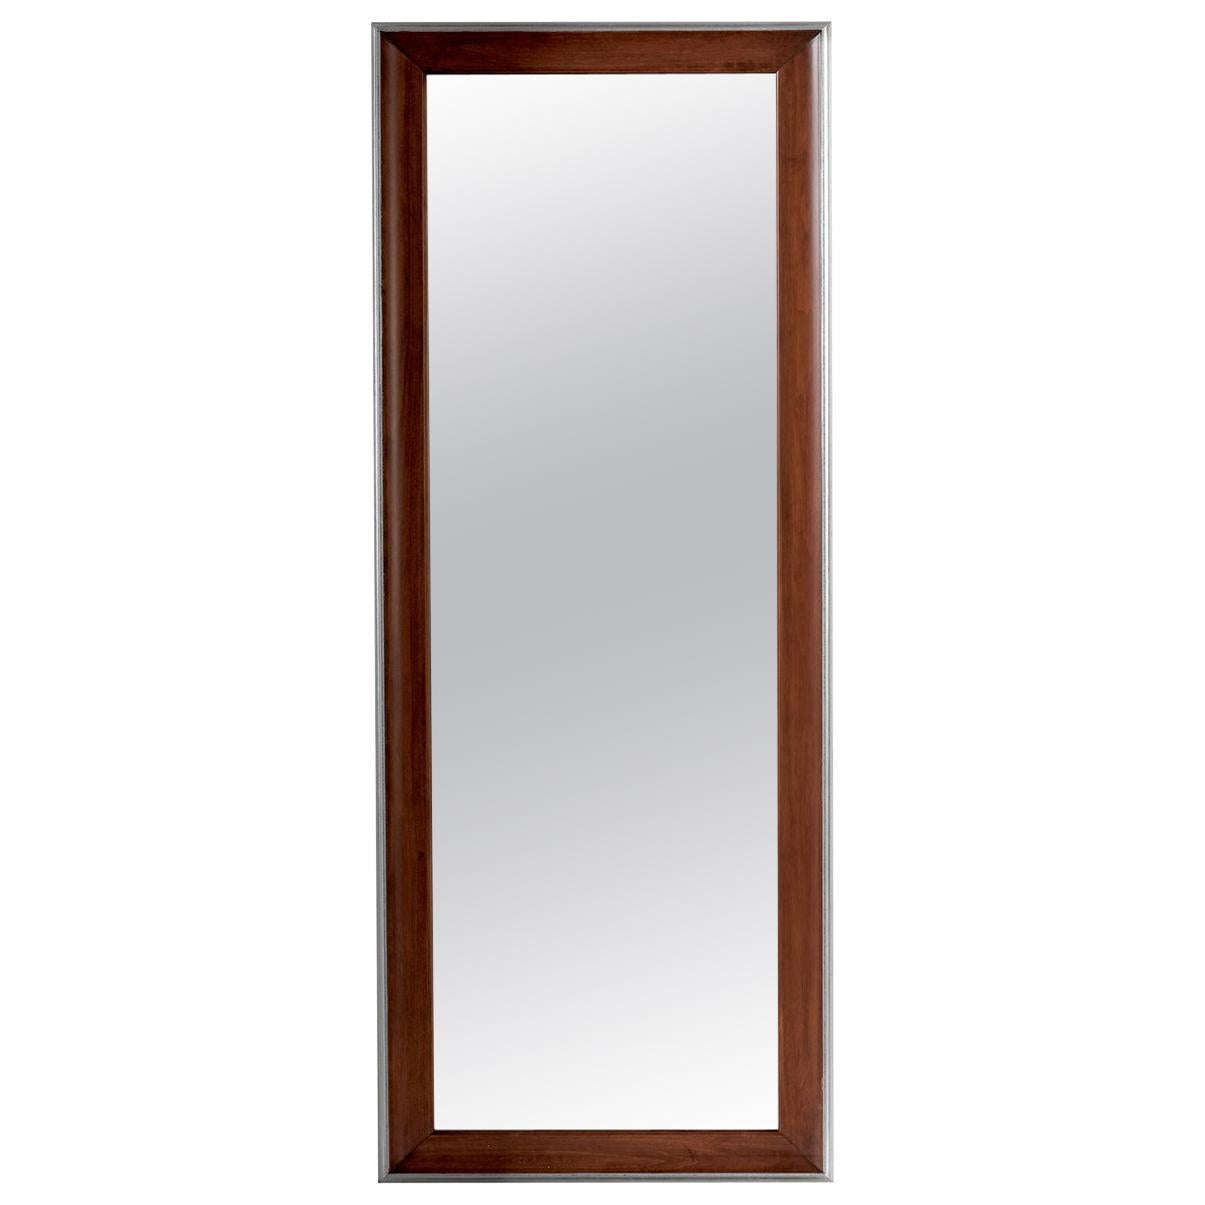 Rectangular Mirror with Brown Wooden Frame